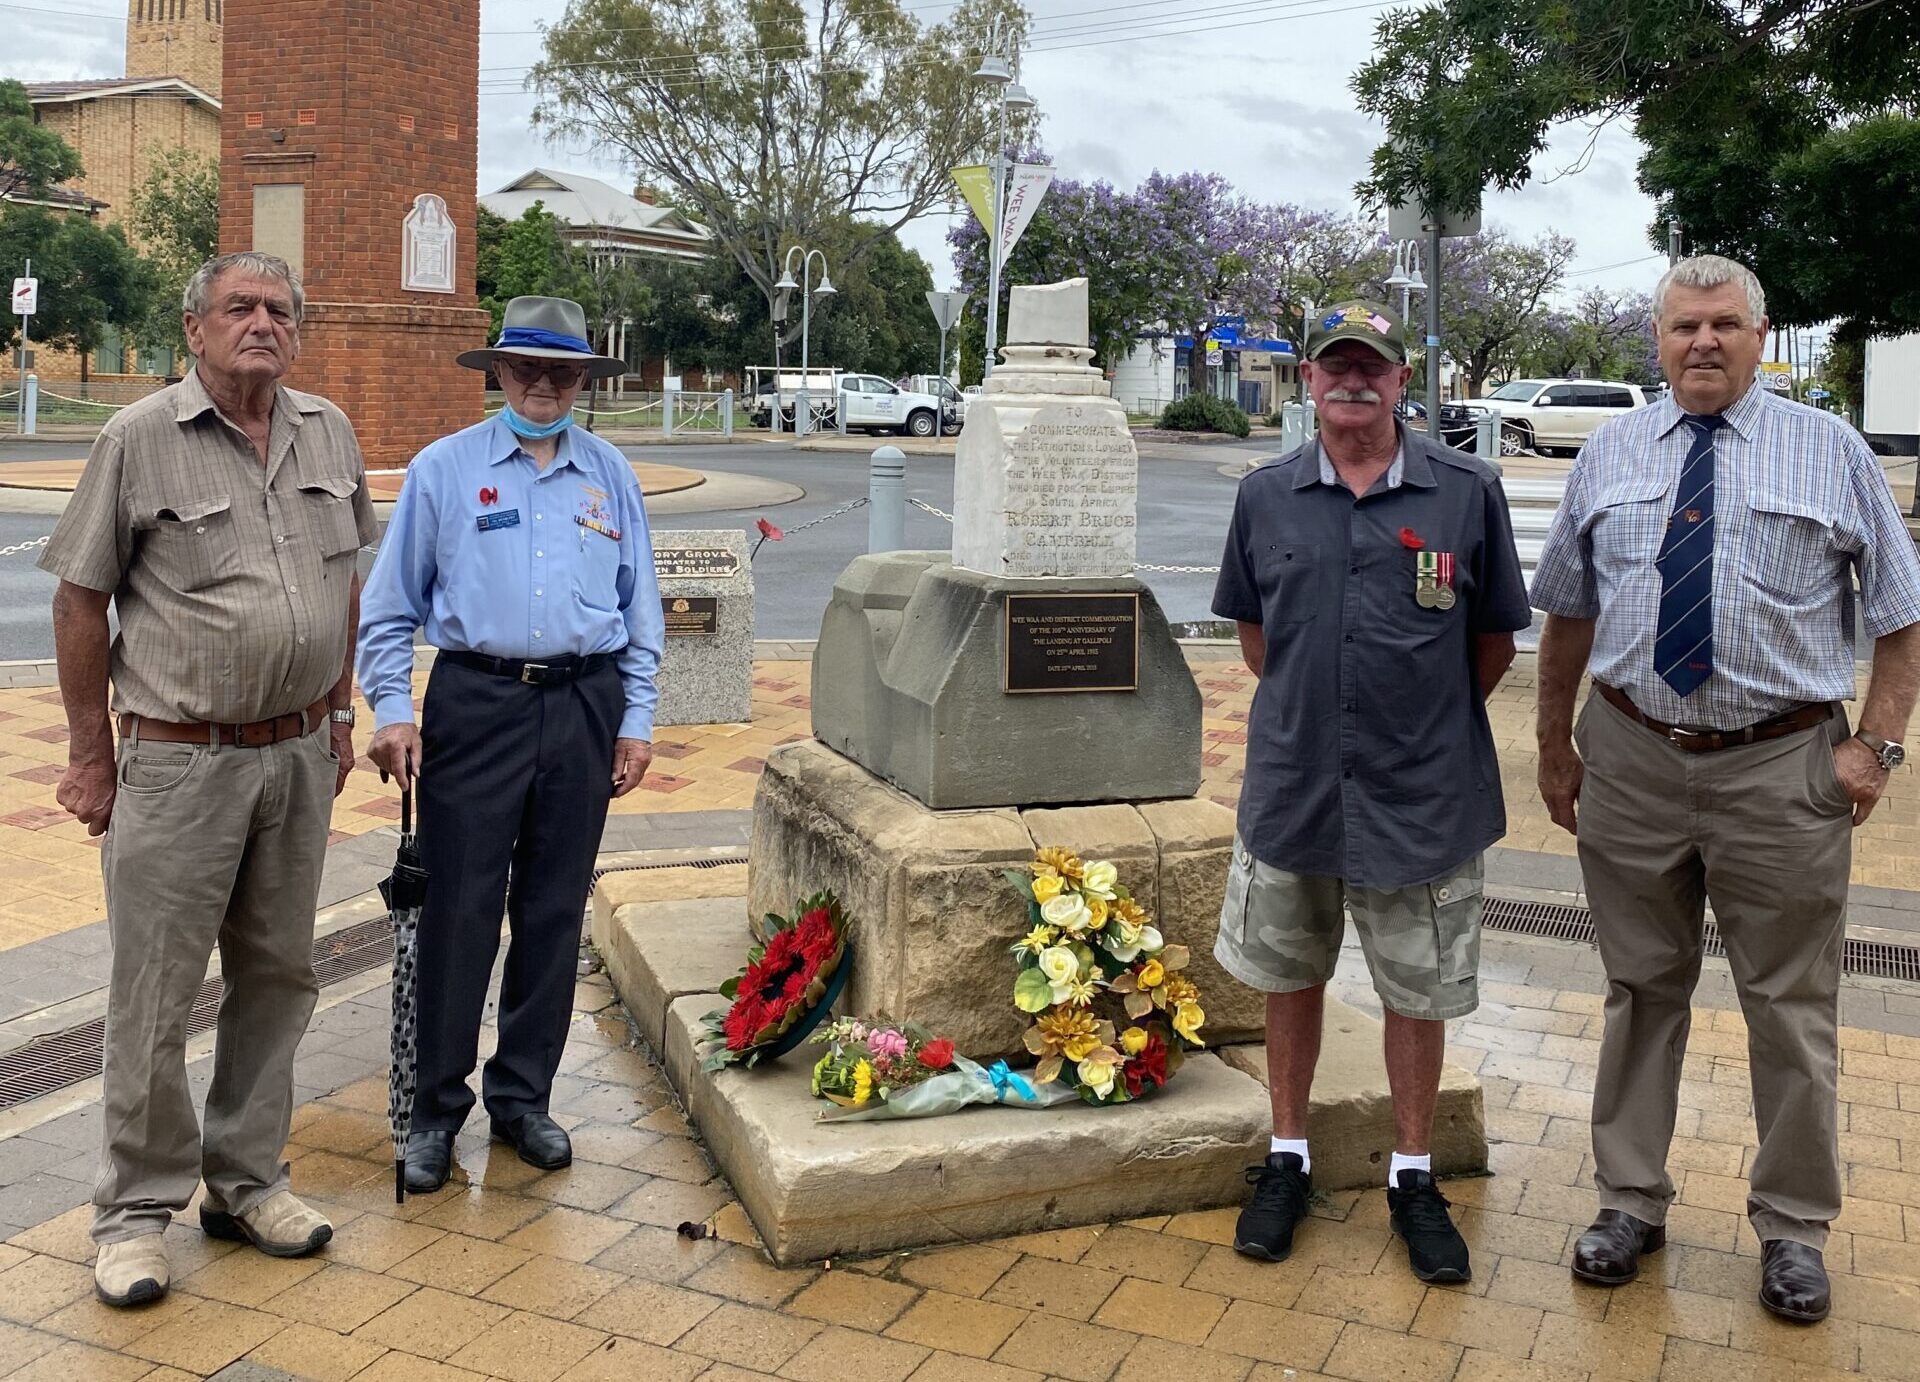 Remembrance Day marked in Wee Waa | PHOTOS